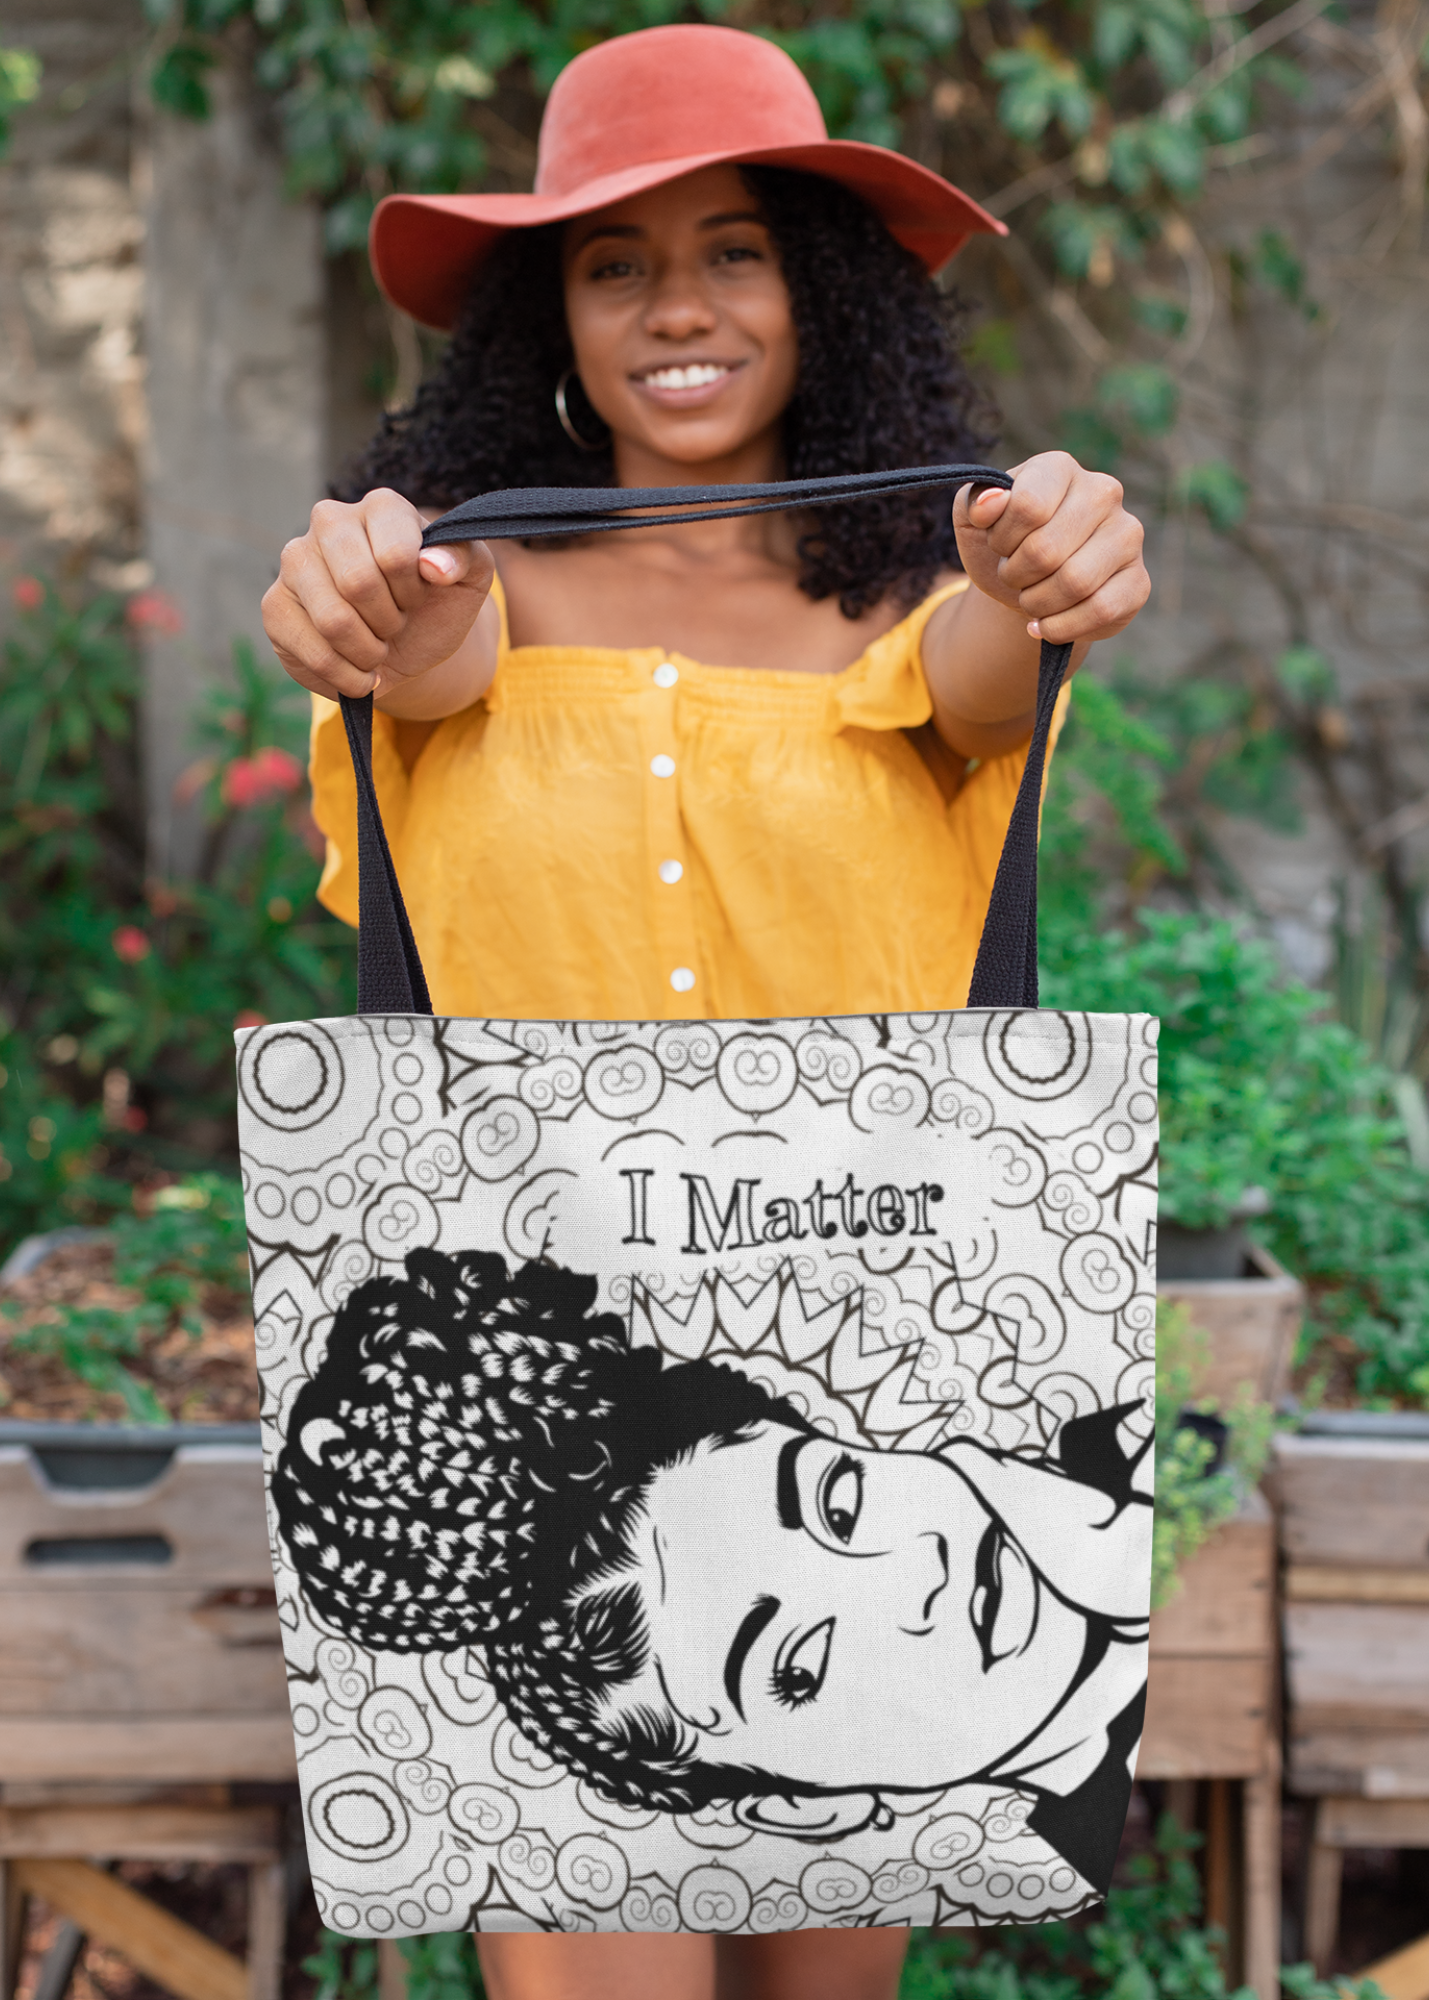 "I Matter" African-American Women Positive Affirmation Quote Tote Bag/Black & White